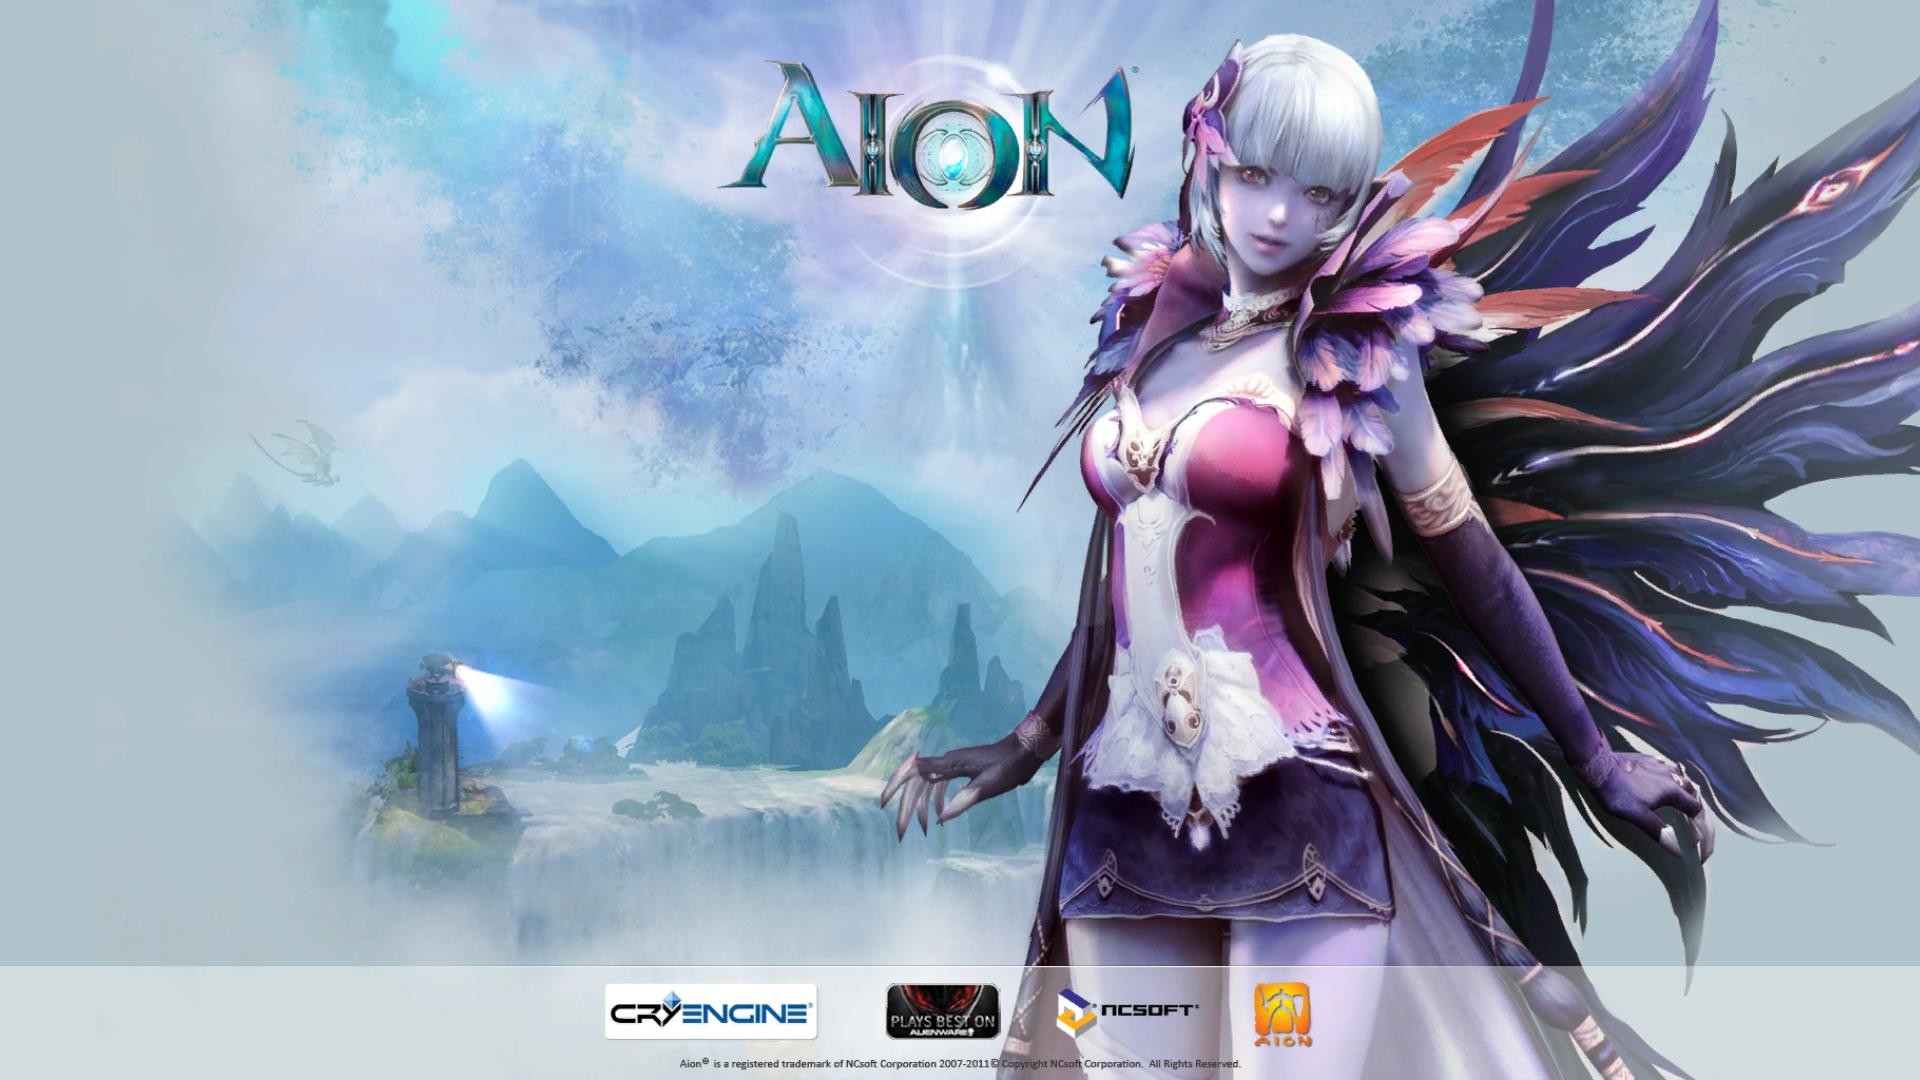 1920x1080 View Fullsize Aion: The Tower of Eternity Image